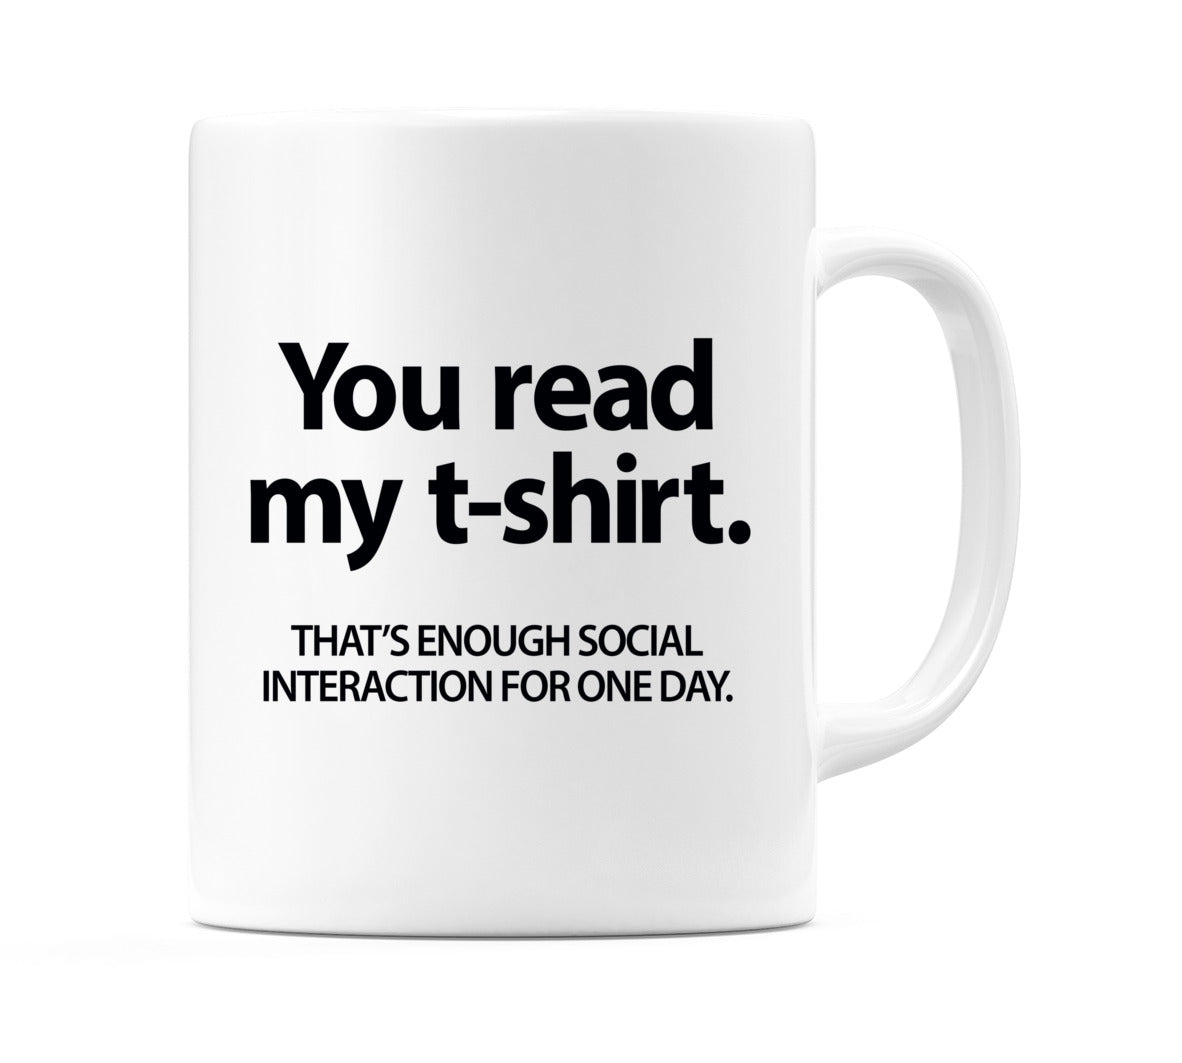 You Read My T-Shirt. That'S Enough Soical Interaction For One Day. Mug